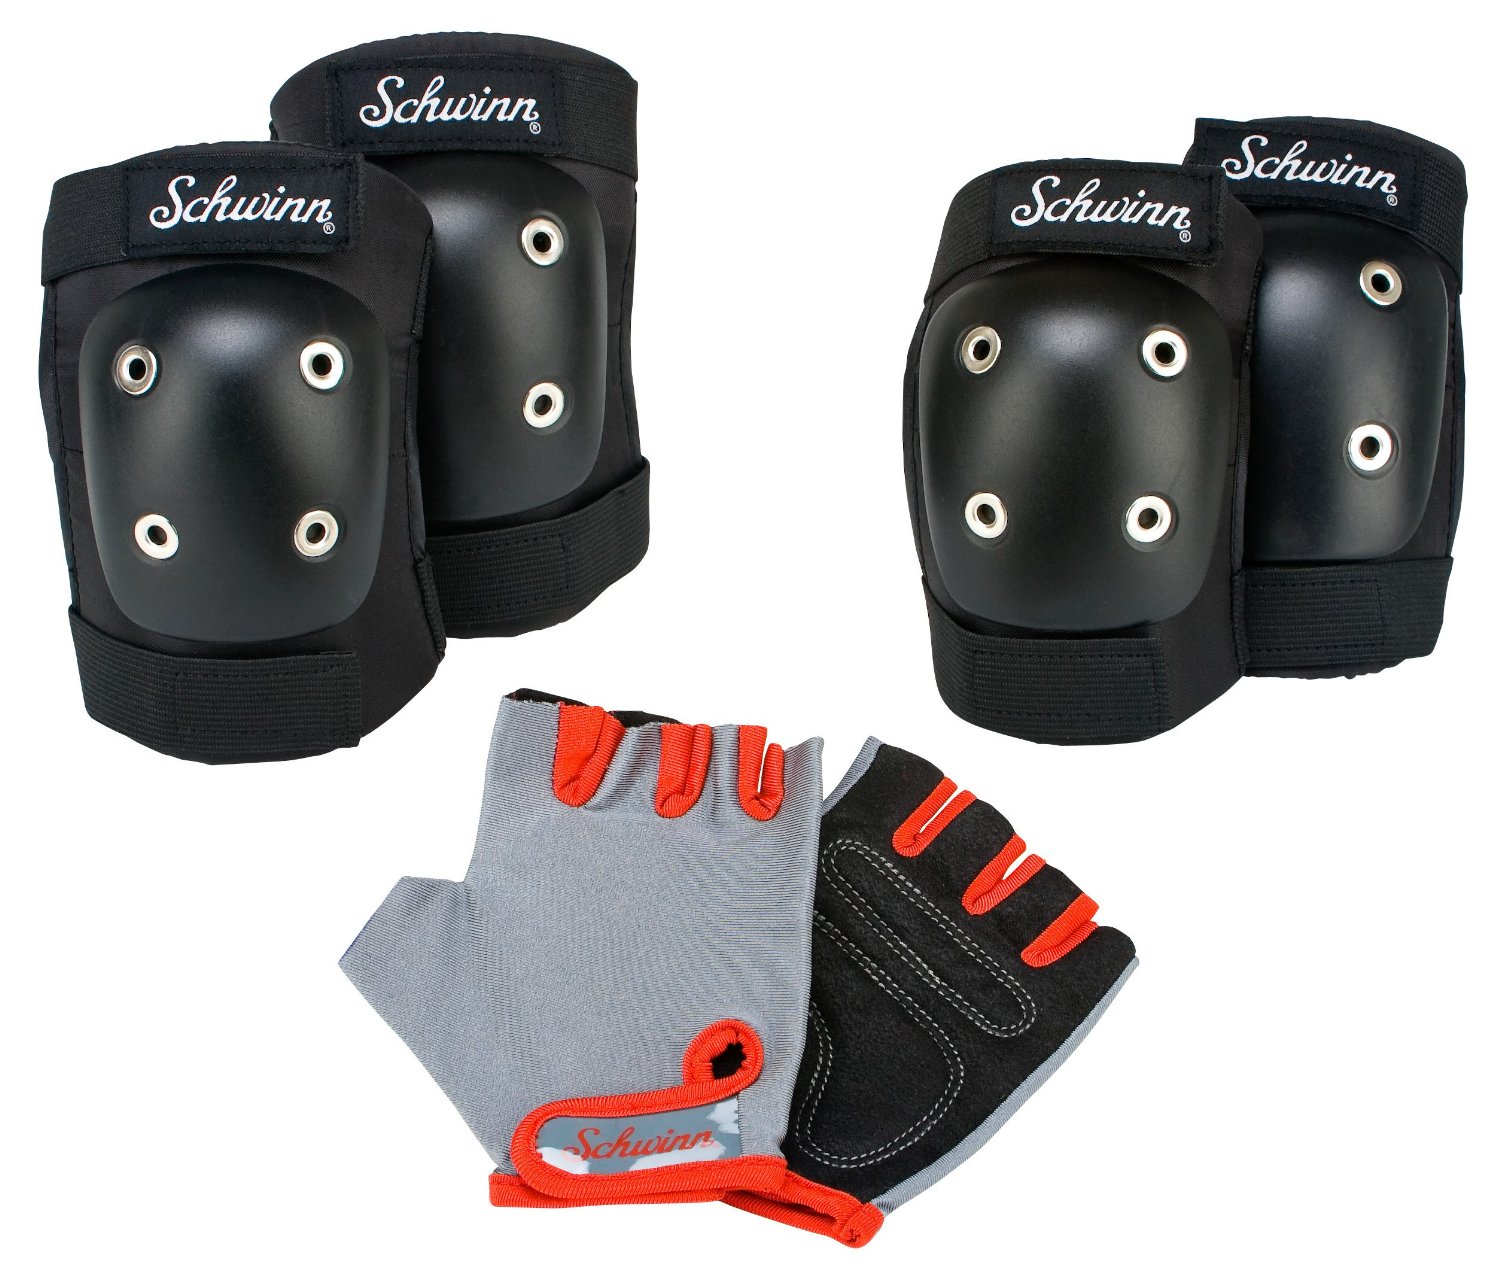 Schwinn Pad Set with Knee, Elbow Pads and Gloves for Children